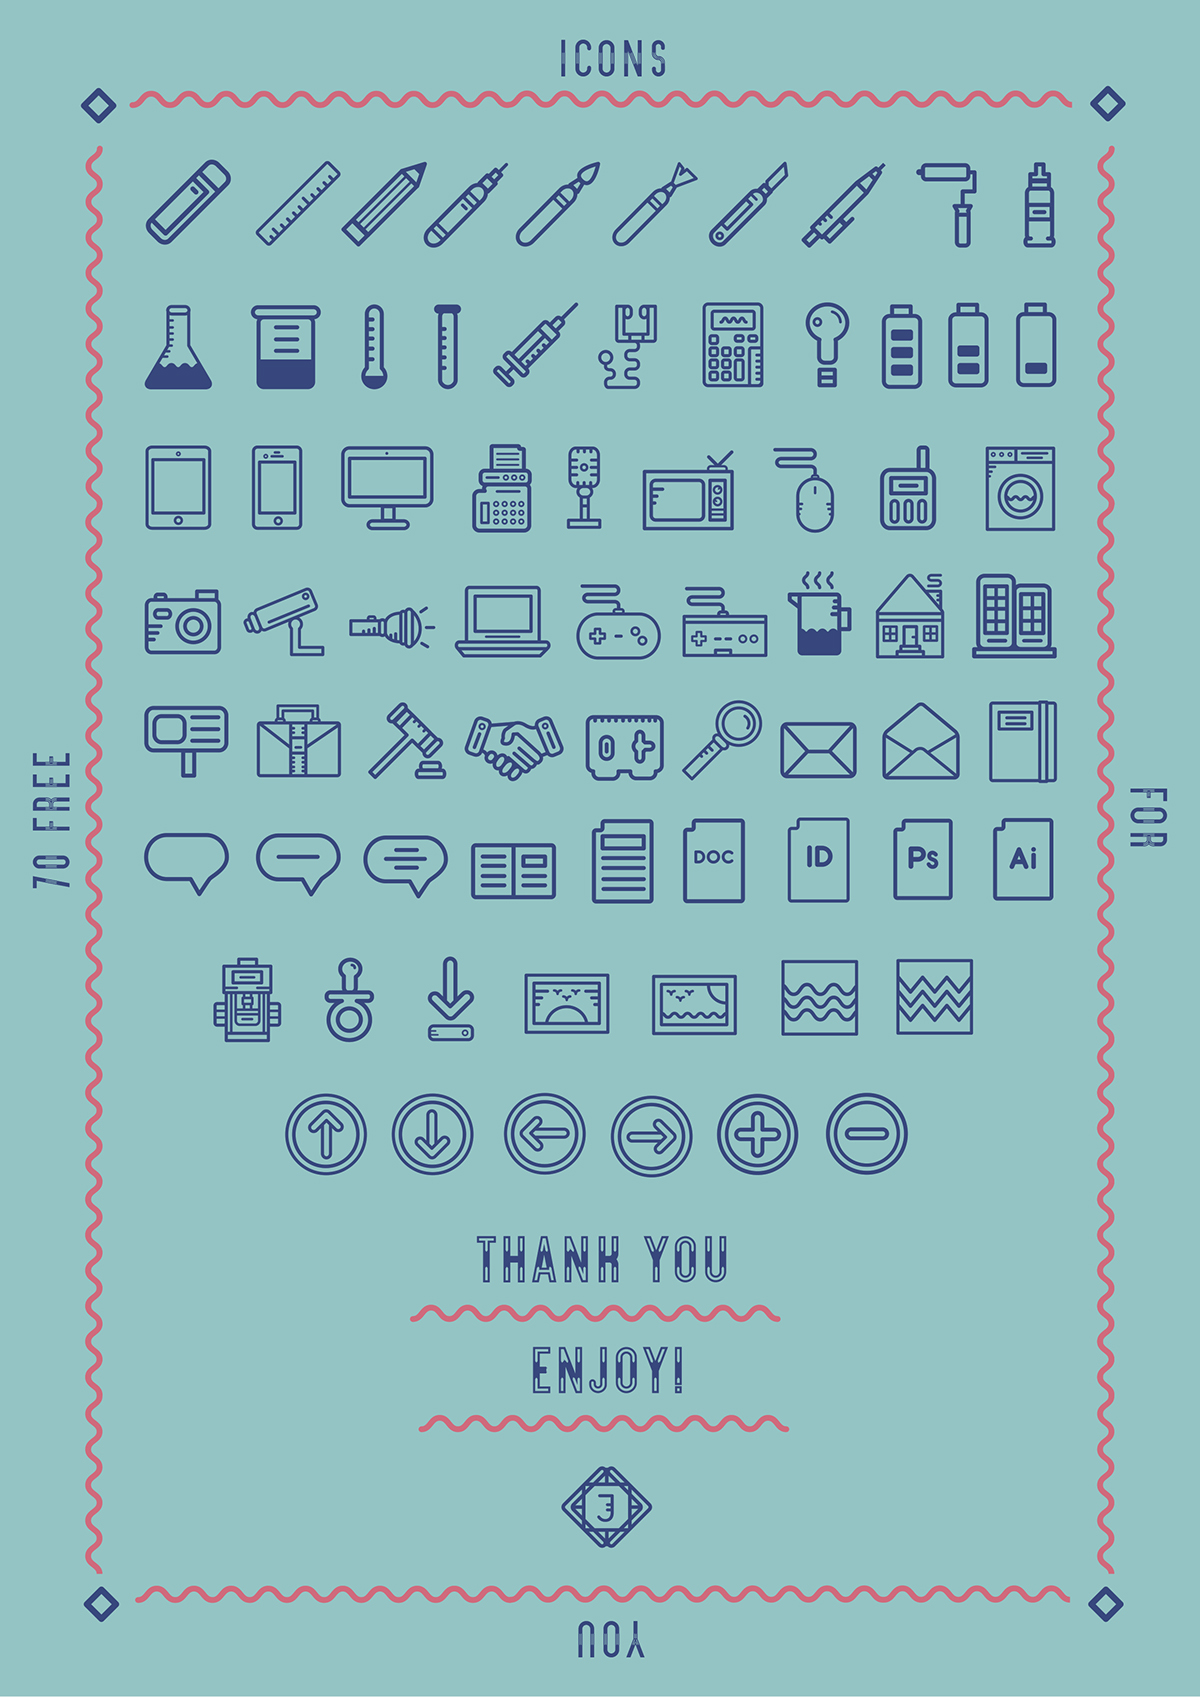 icons pictograms new graphic cool graphic art artwork creative dope art free inspiration graphics detail icon art